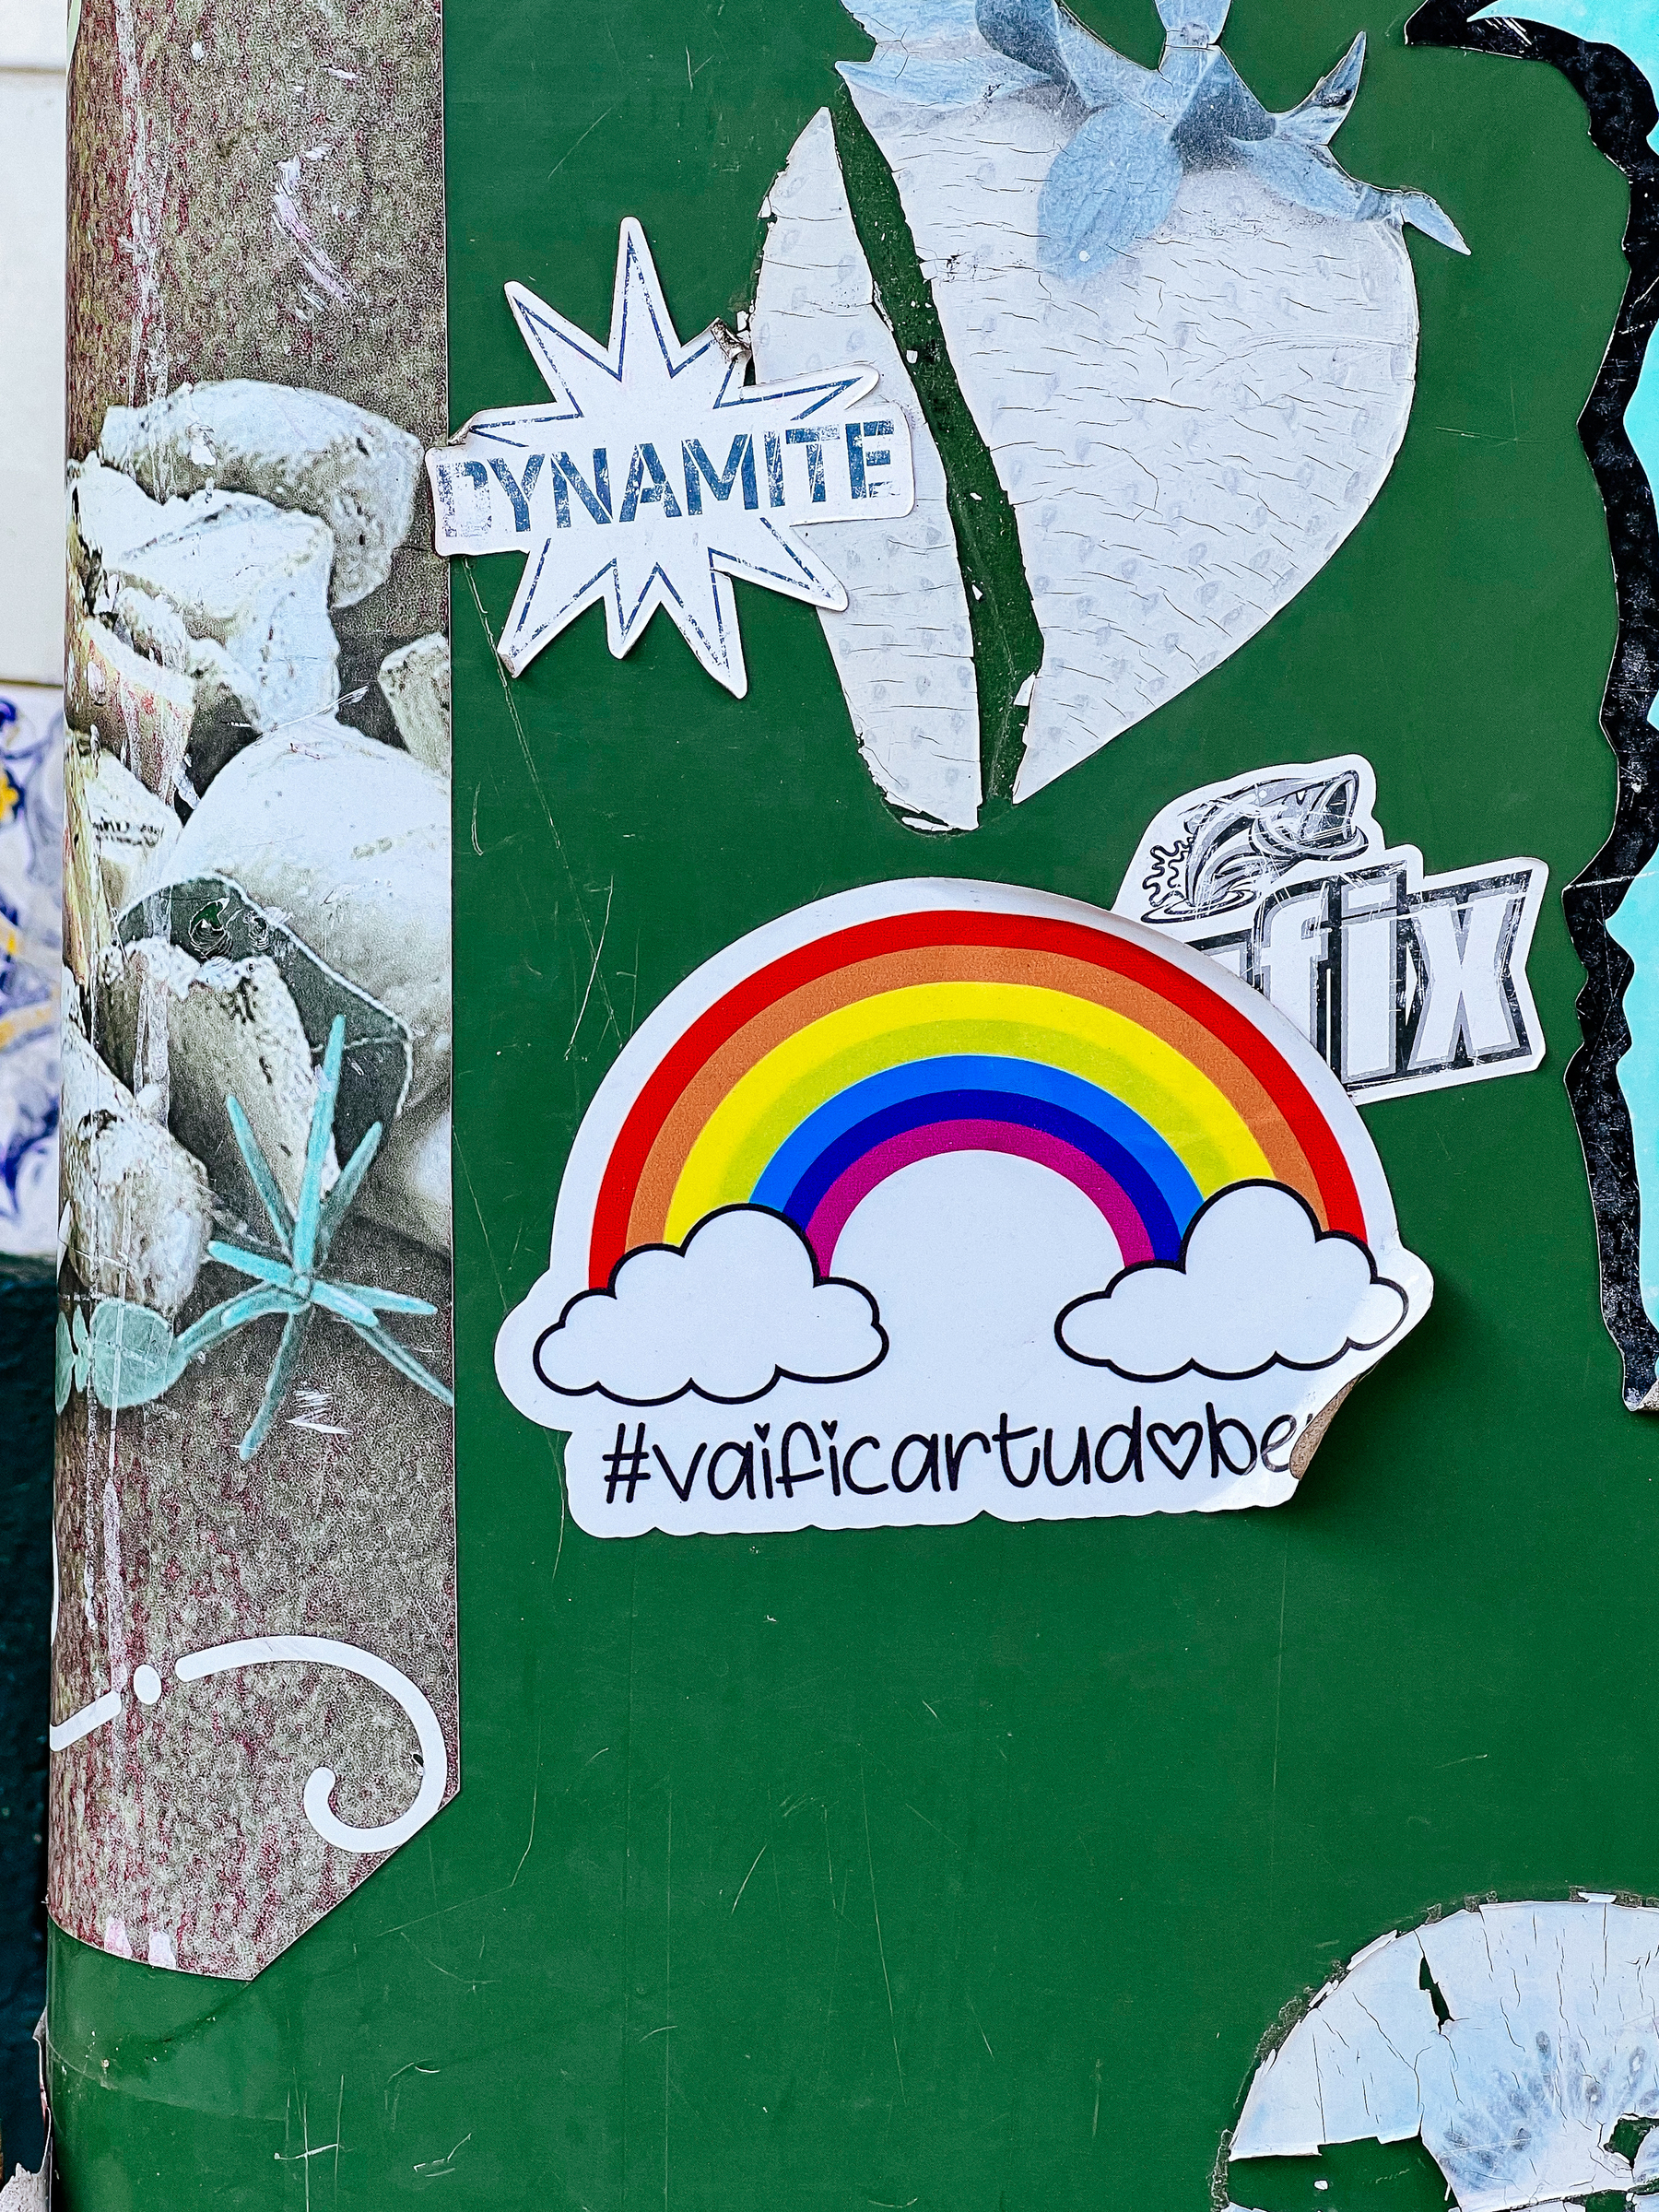 A rainbow sticker with text &ldquo;#vaificartudobem&rdquo; affixed to a weathered green surface surrounded by other worn stickers and graffiti elements.